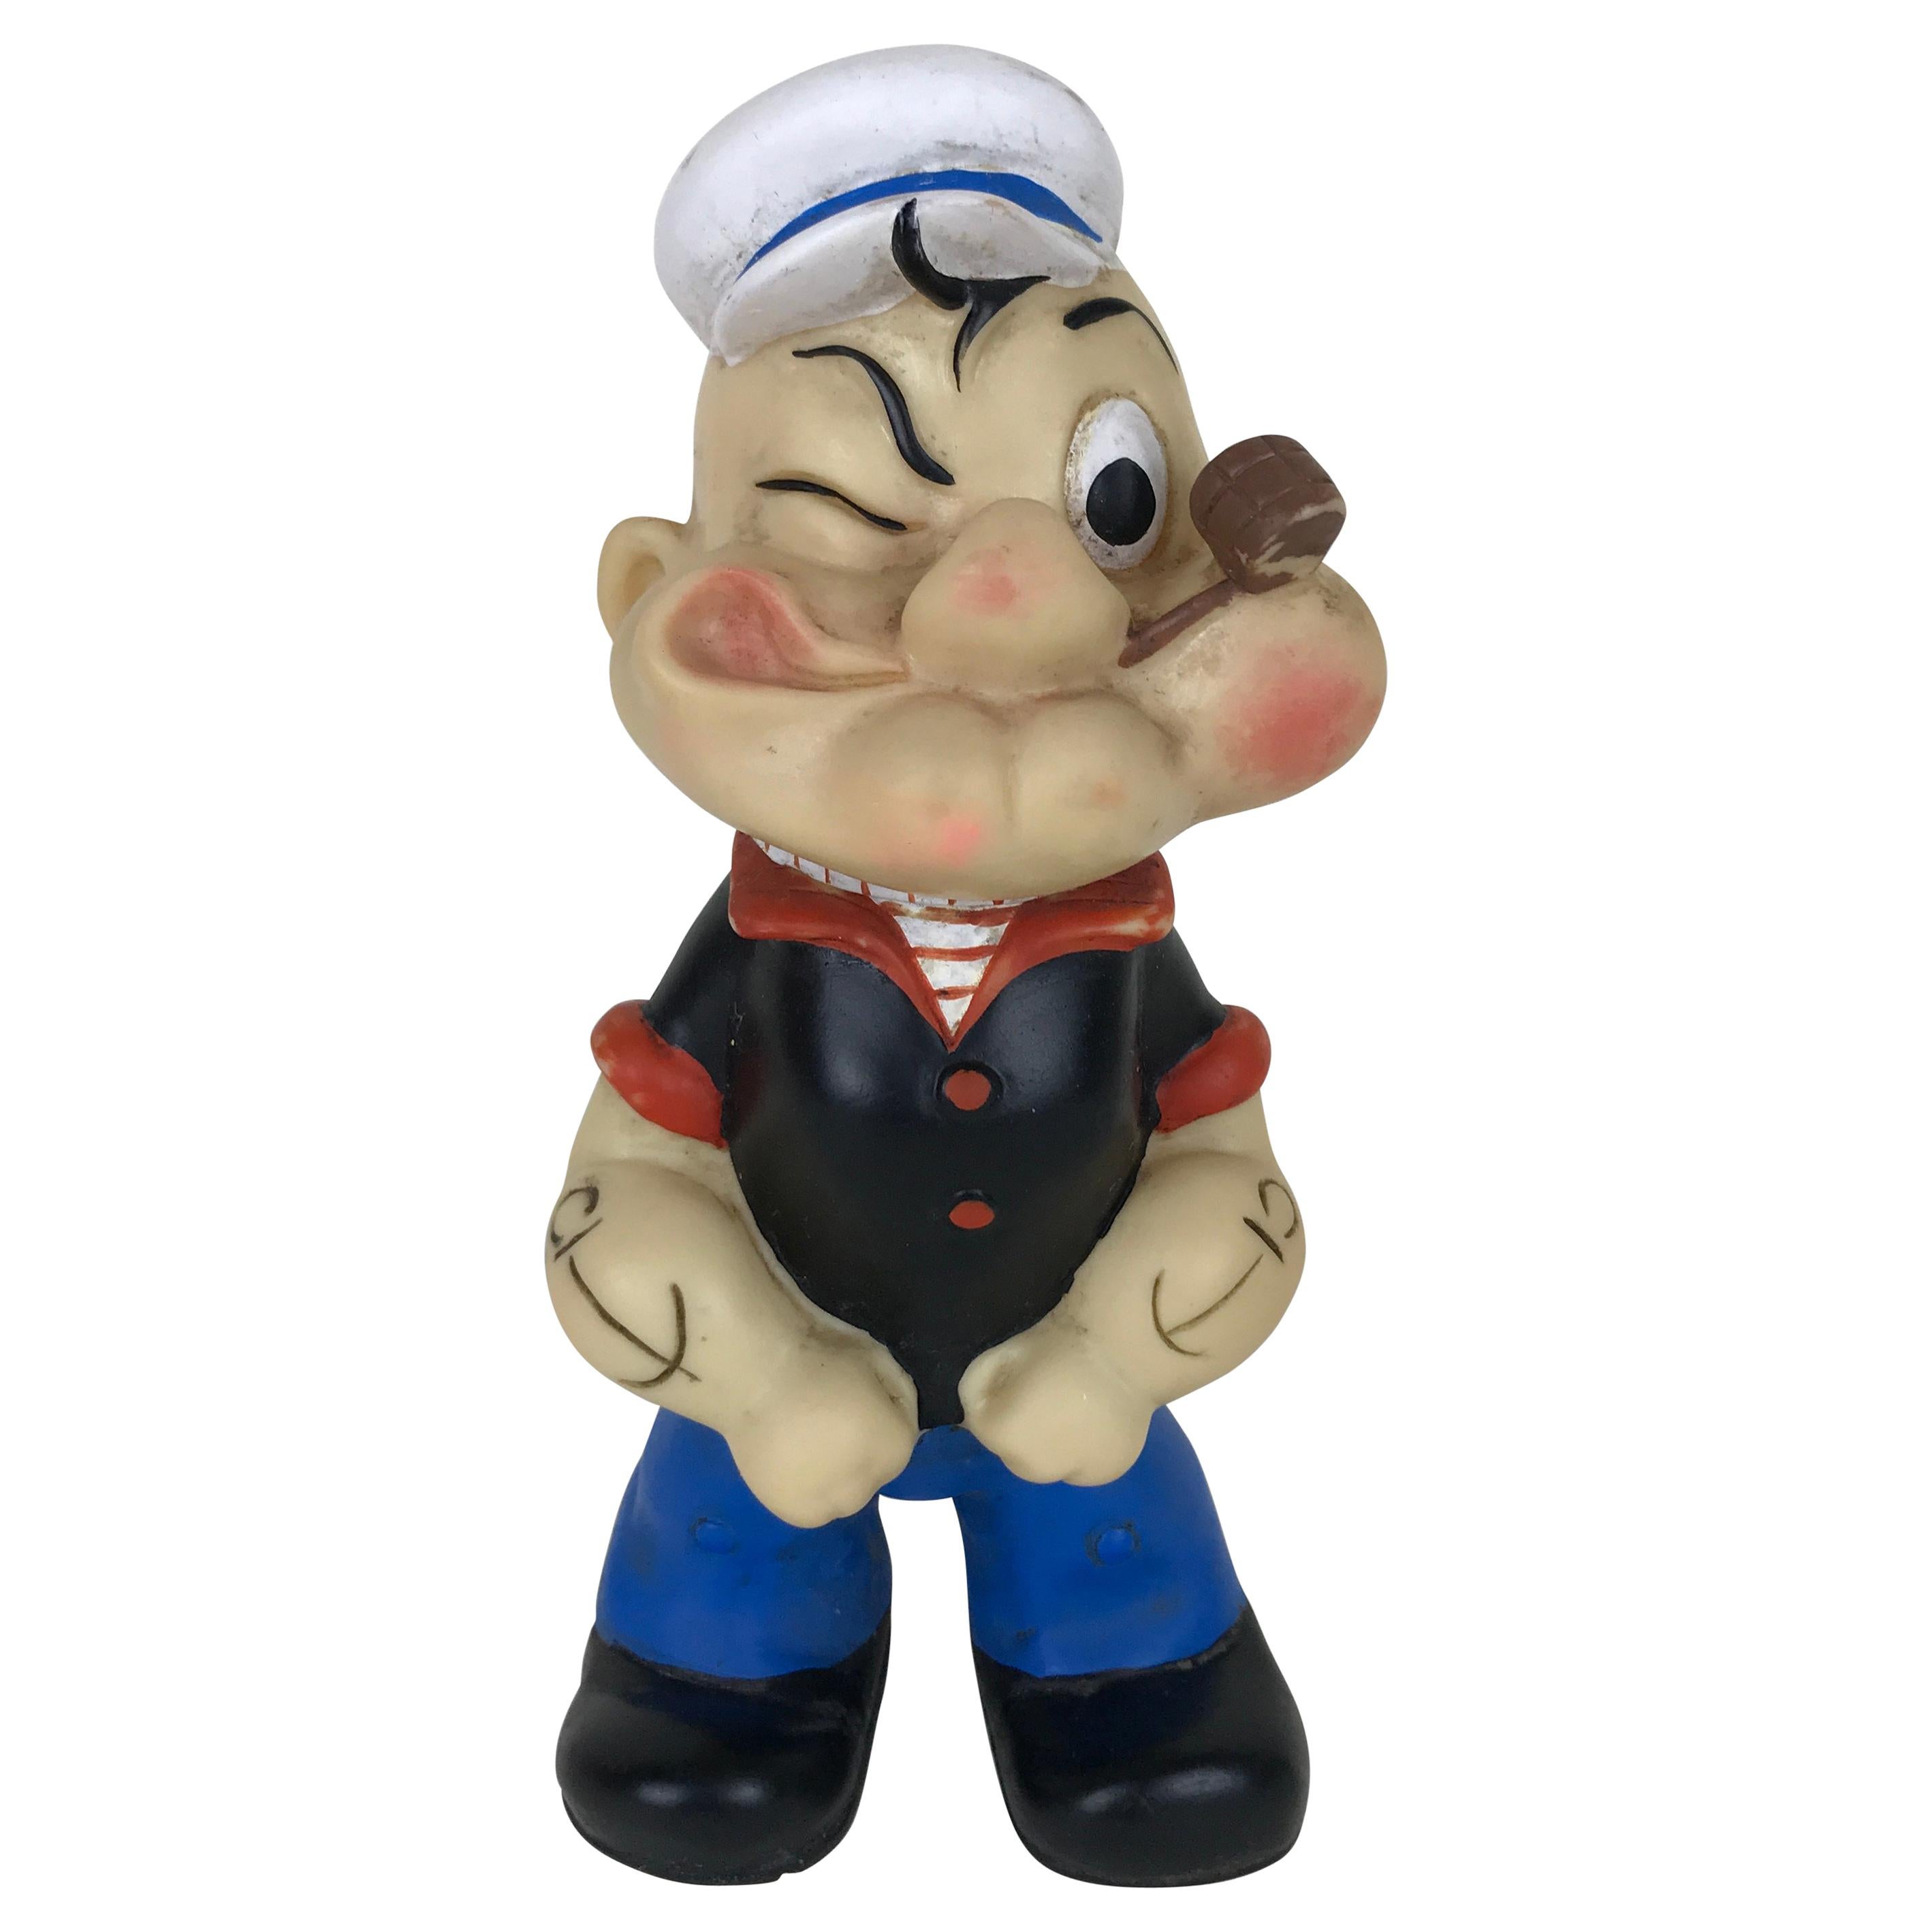 1960s Vintage Italian Popeye the Sailor Rubber Squeak Toy Made by Italo Cremona For Sale